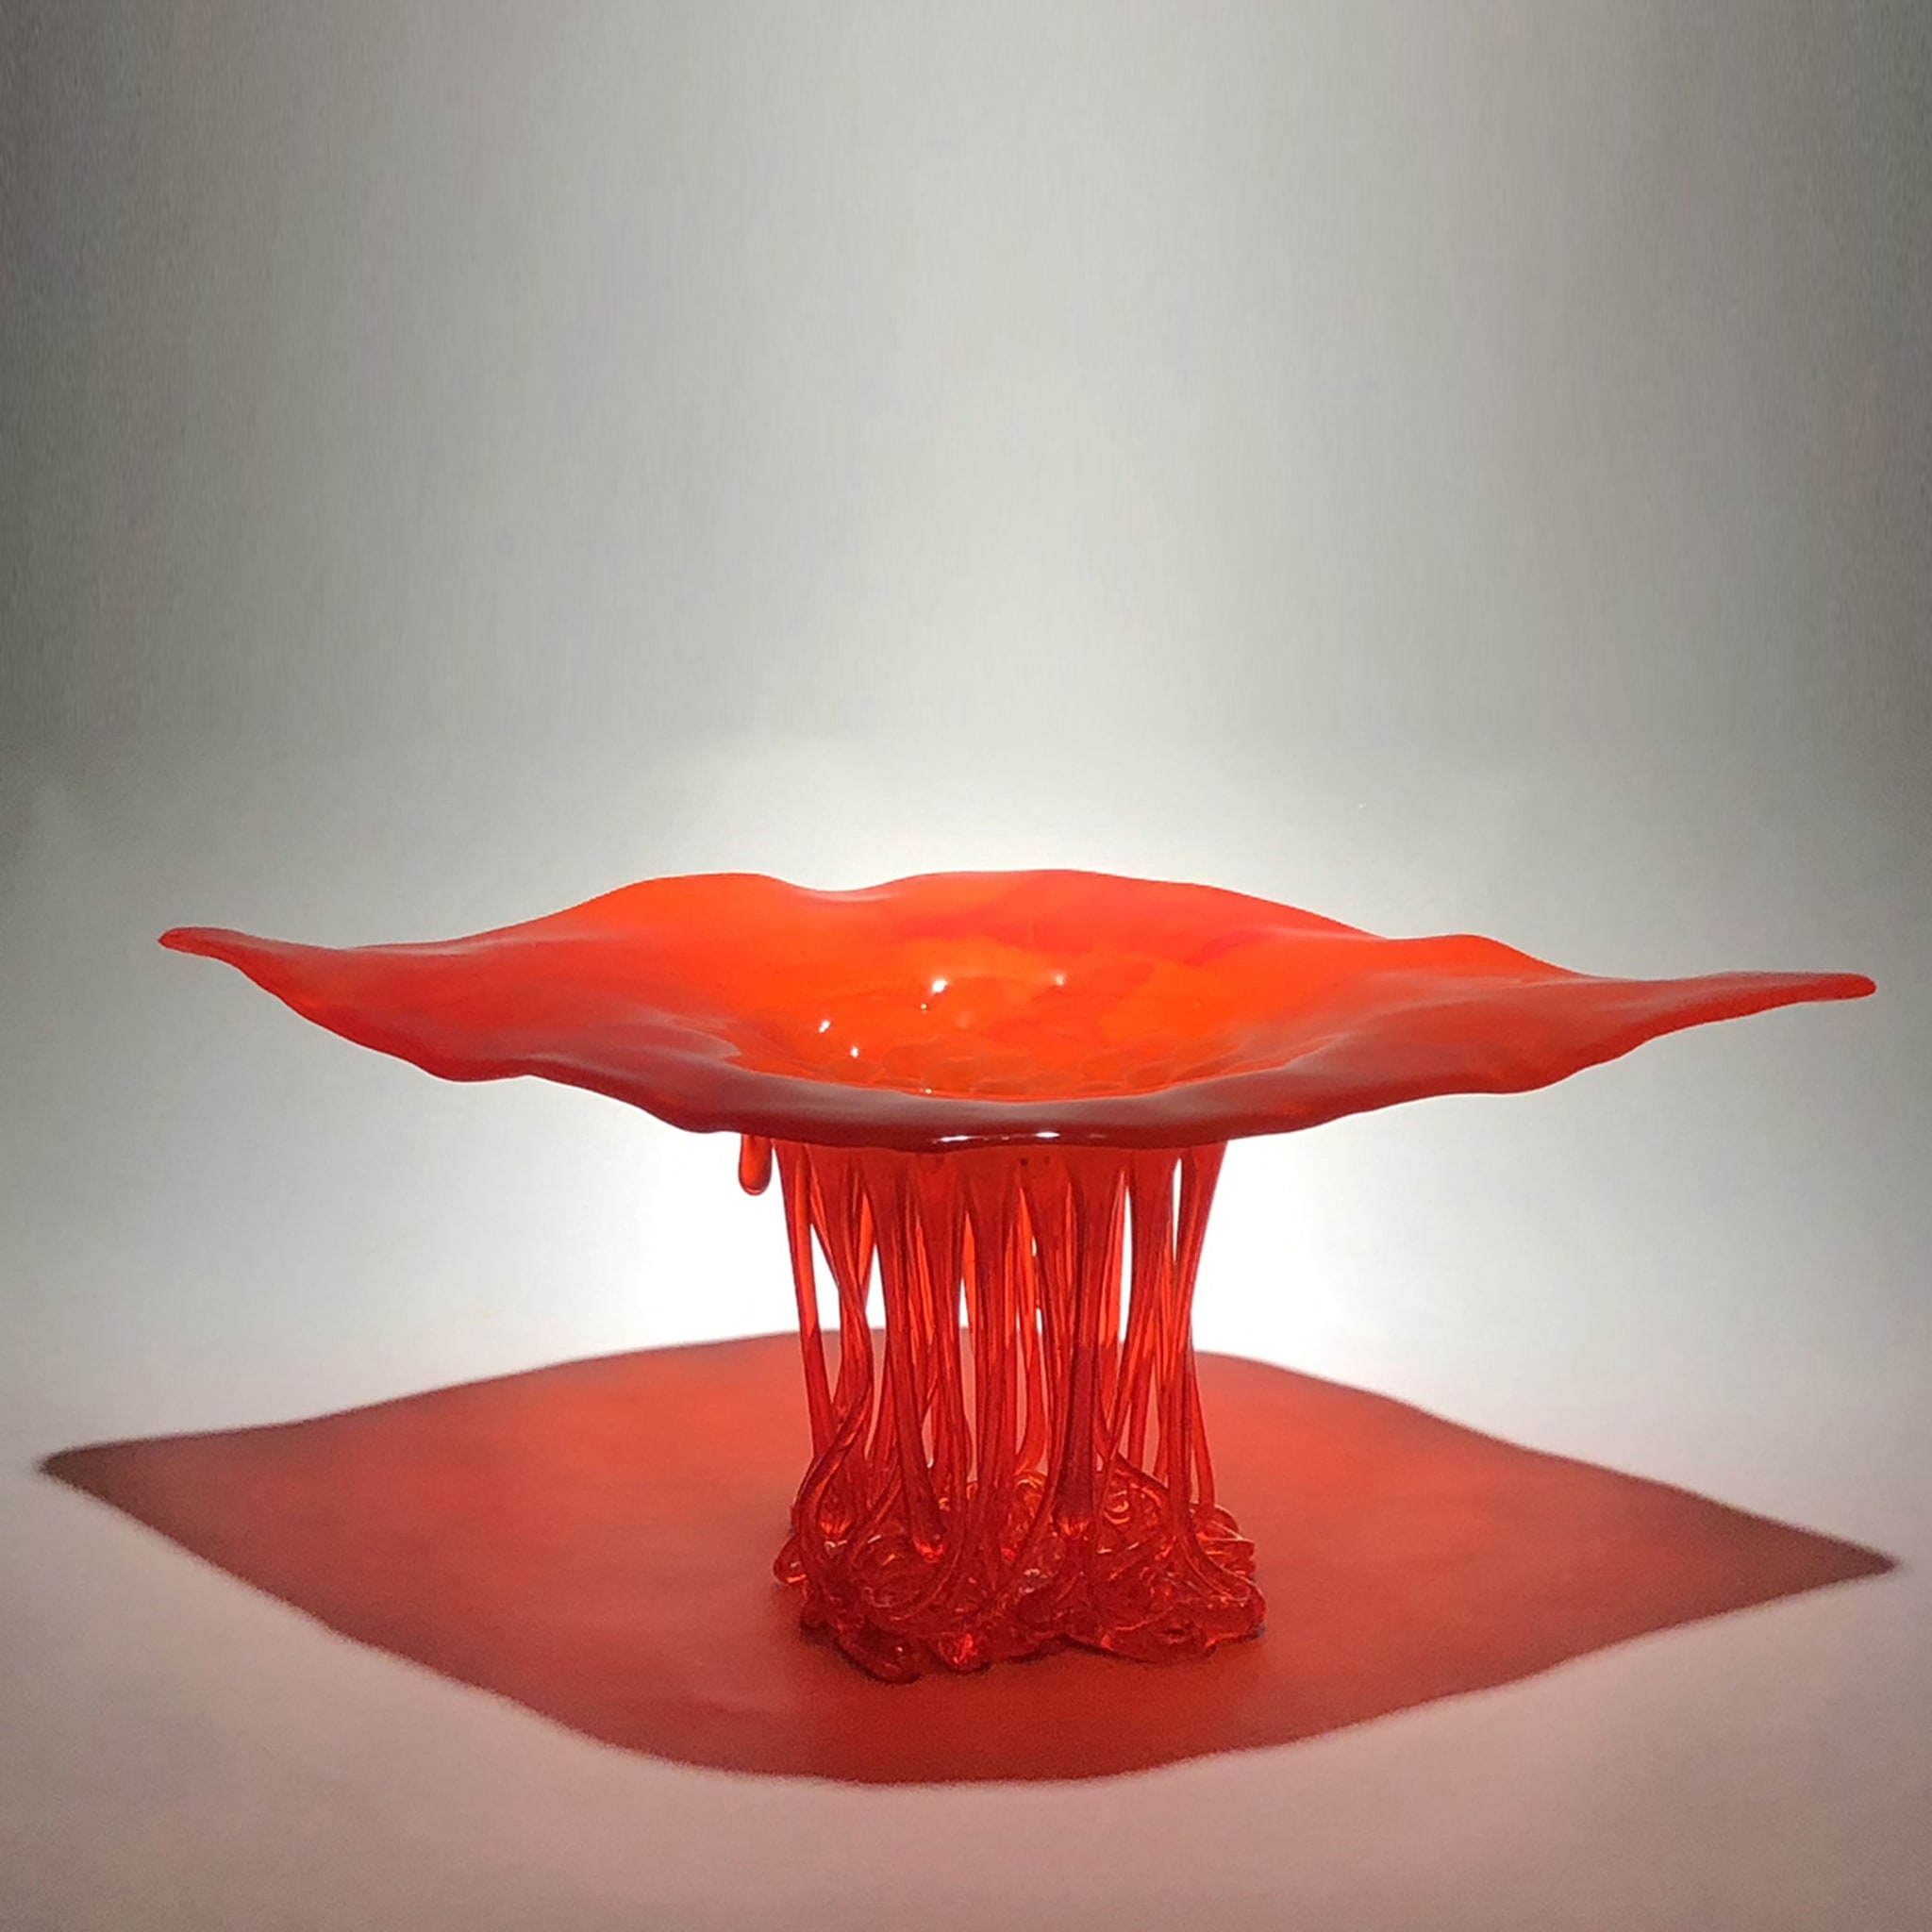 Tramonto Rosso Red Sculpture - Alternative view 1